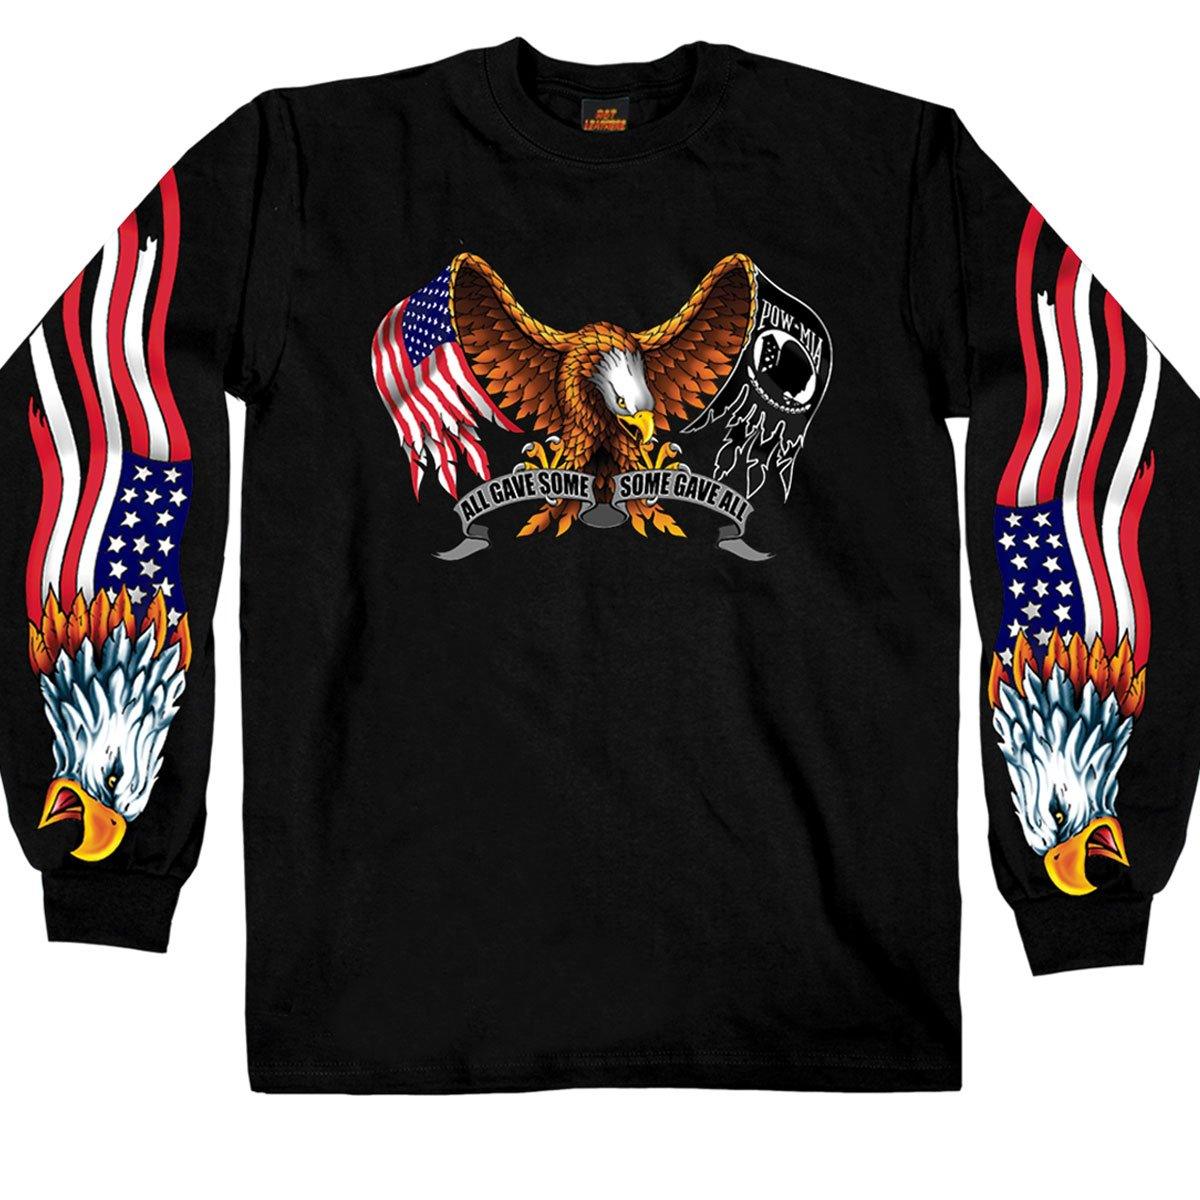 Hot Leathers Men's Some Gave All Long Sleeve Shirt, Black - American Legend Rider